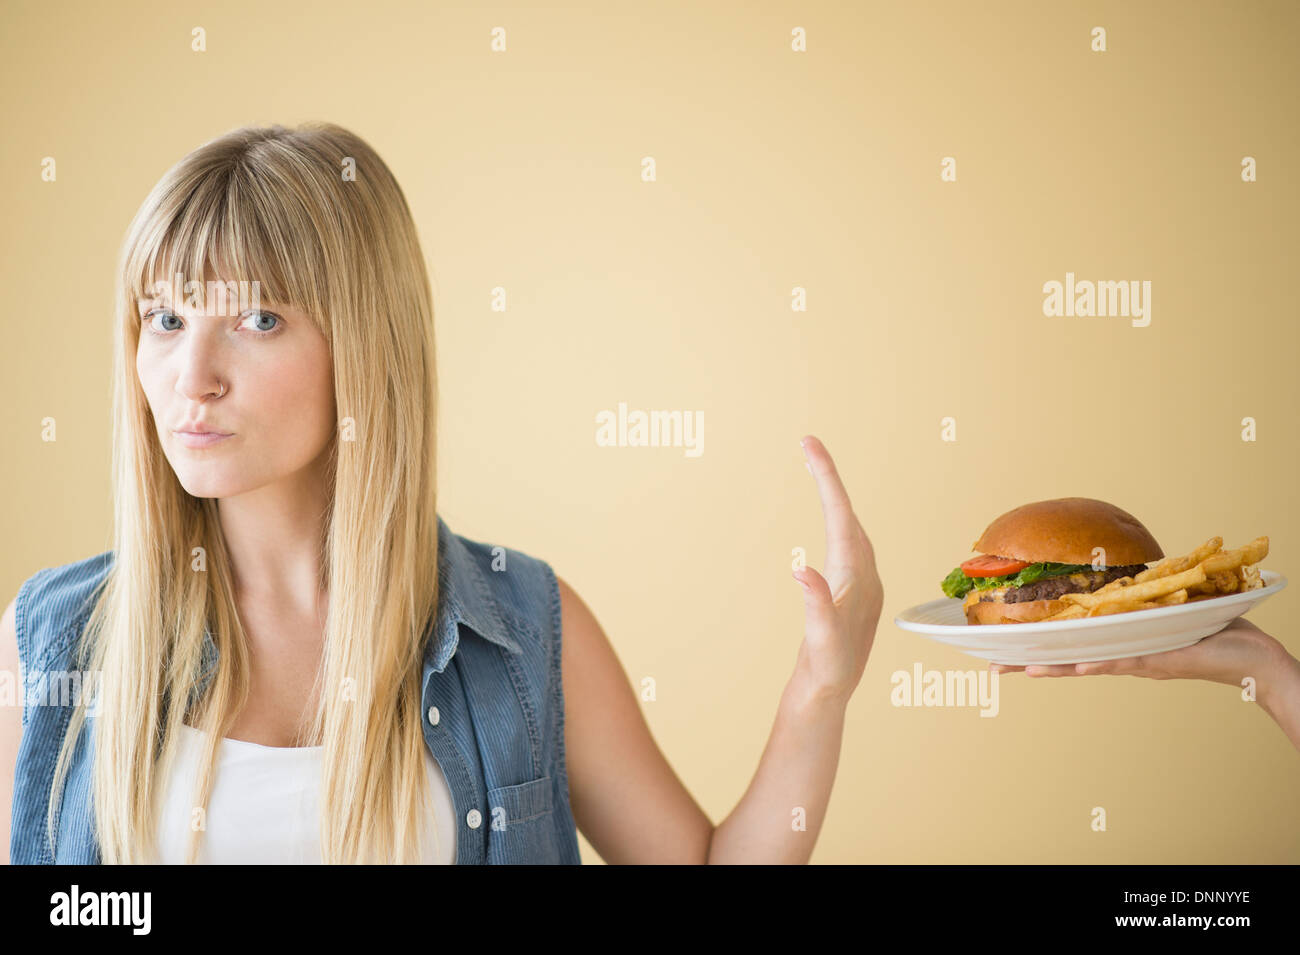 Rejecting Food High Resolution Stock Photography and Images - Alamy